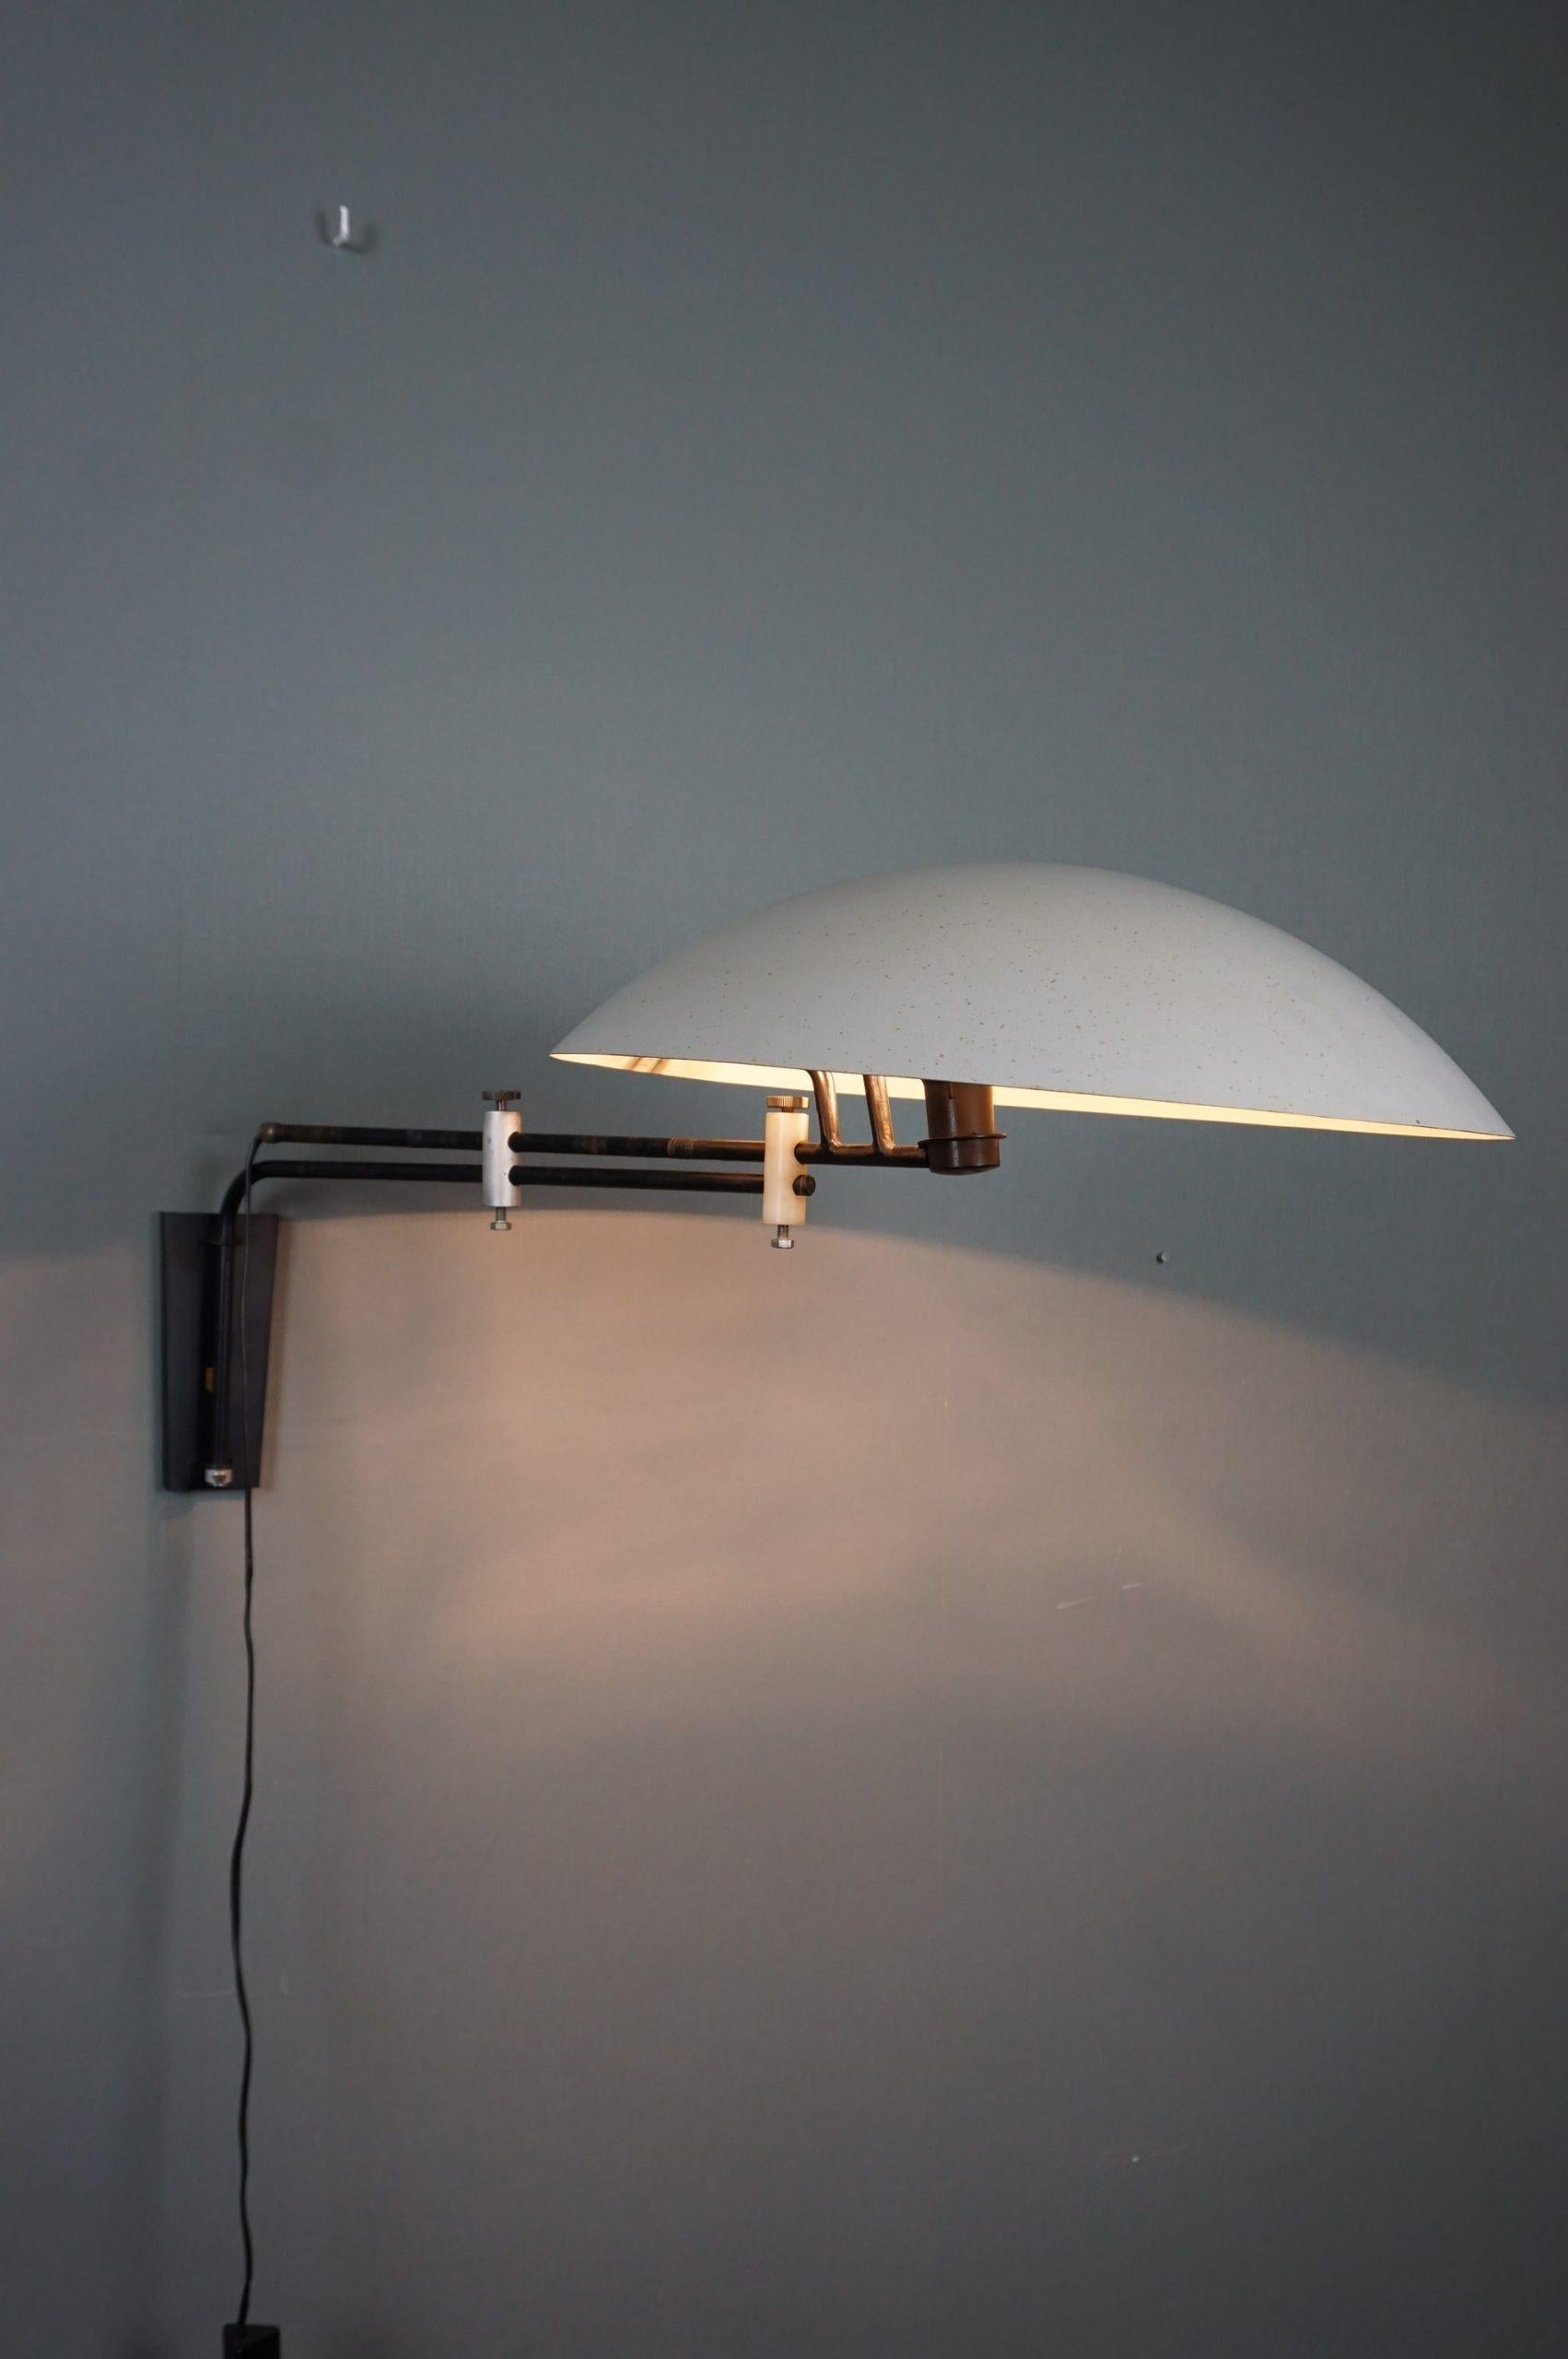 This lamp designed by Louis Kalff for Philips in 1957 is a true design icon. This model, which is more than 60 years old, is still a modern lamp even today.

This adjustable wall lamp designed in 1958, model NX23, is truly fantastic in design. The